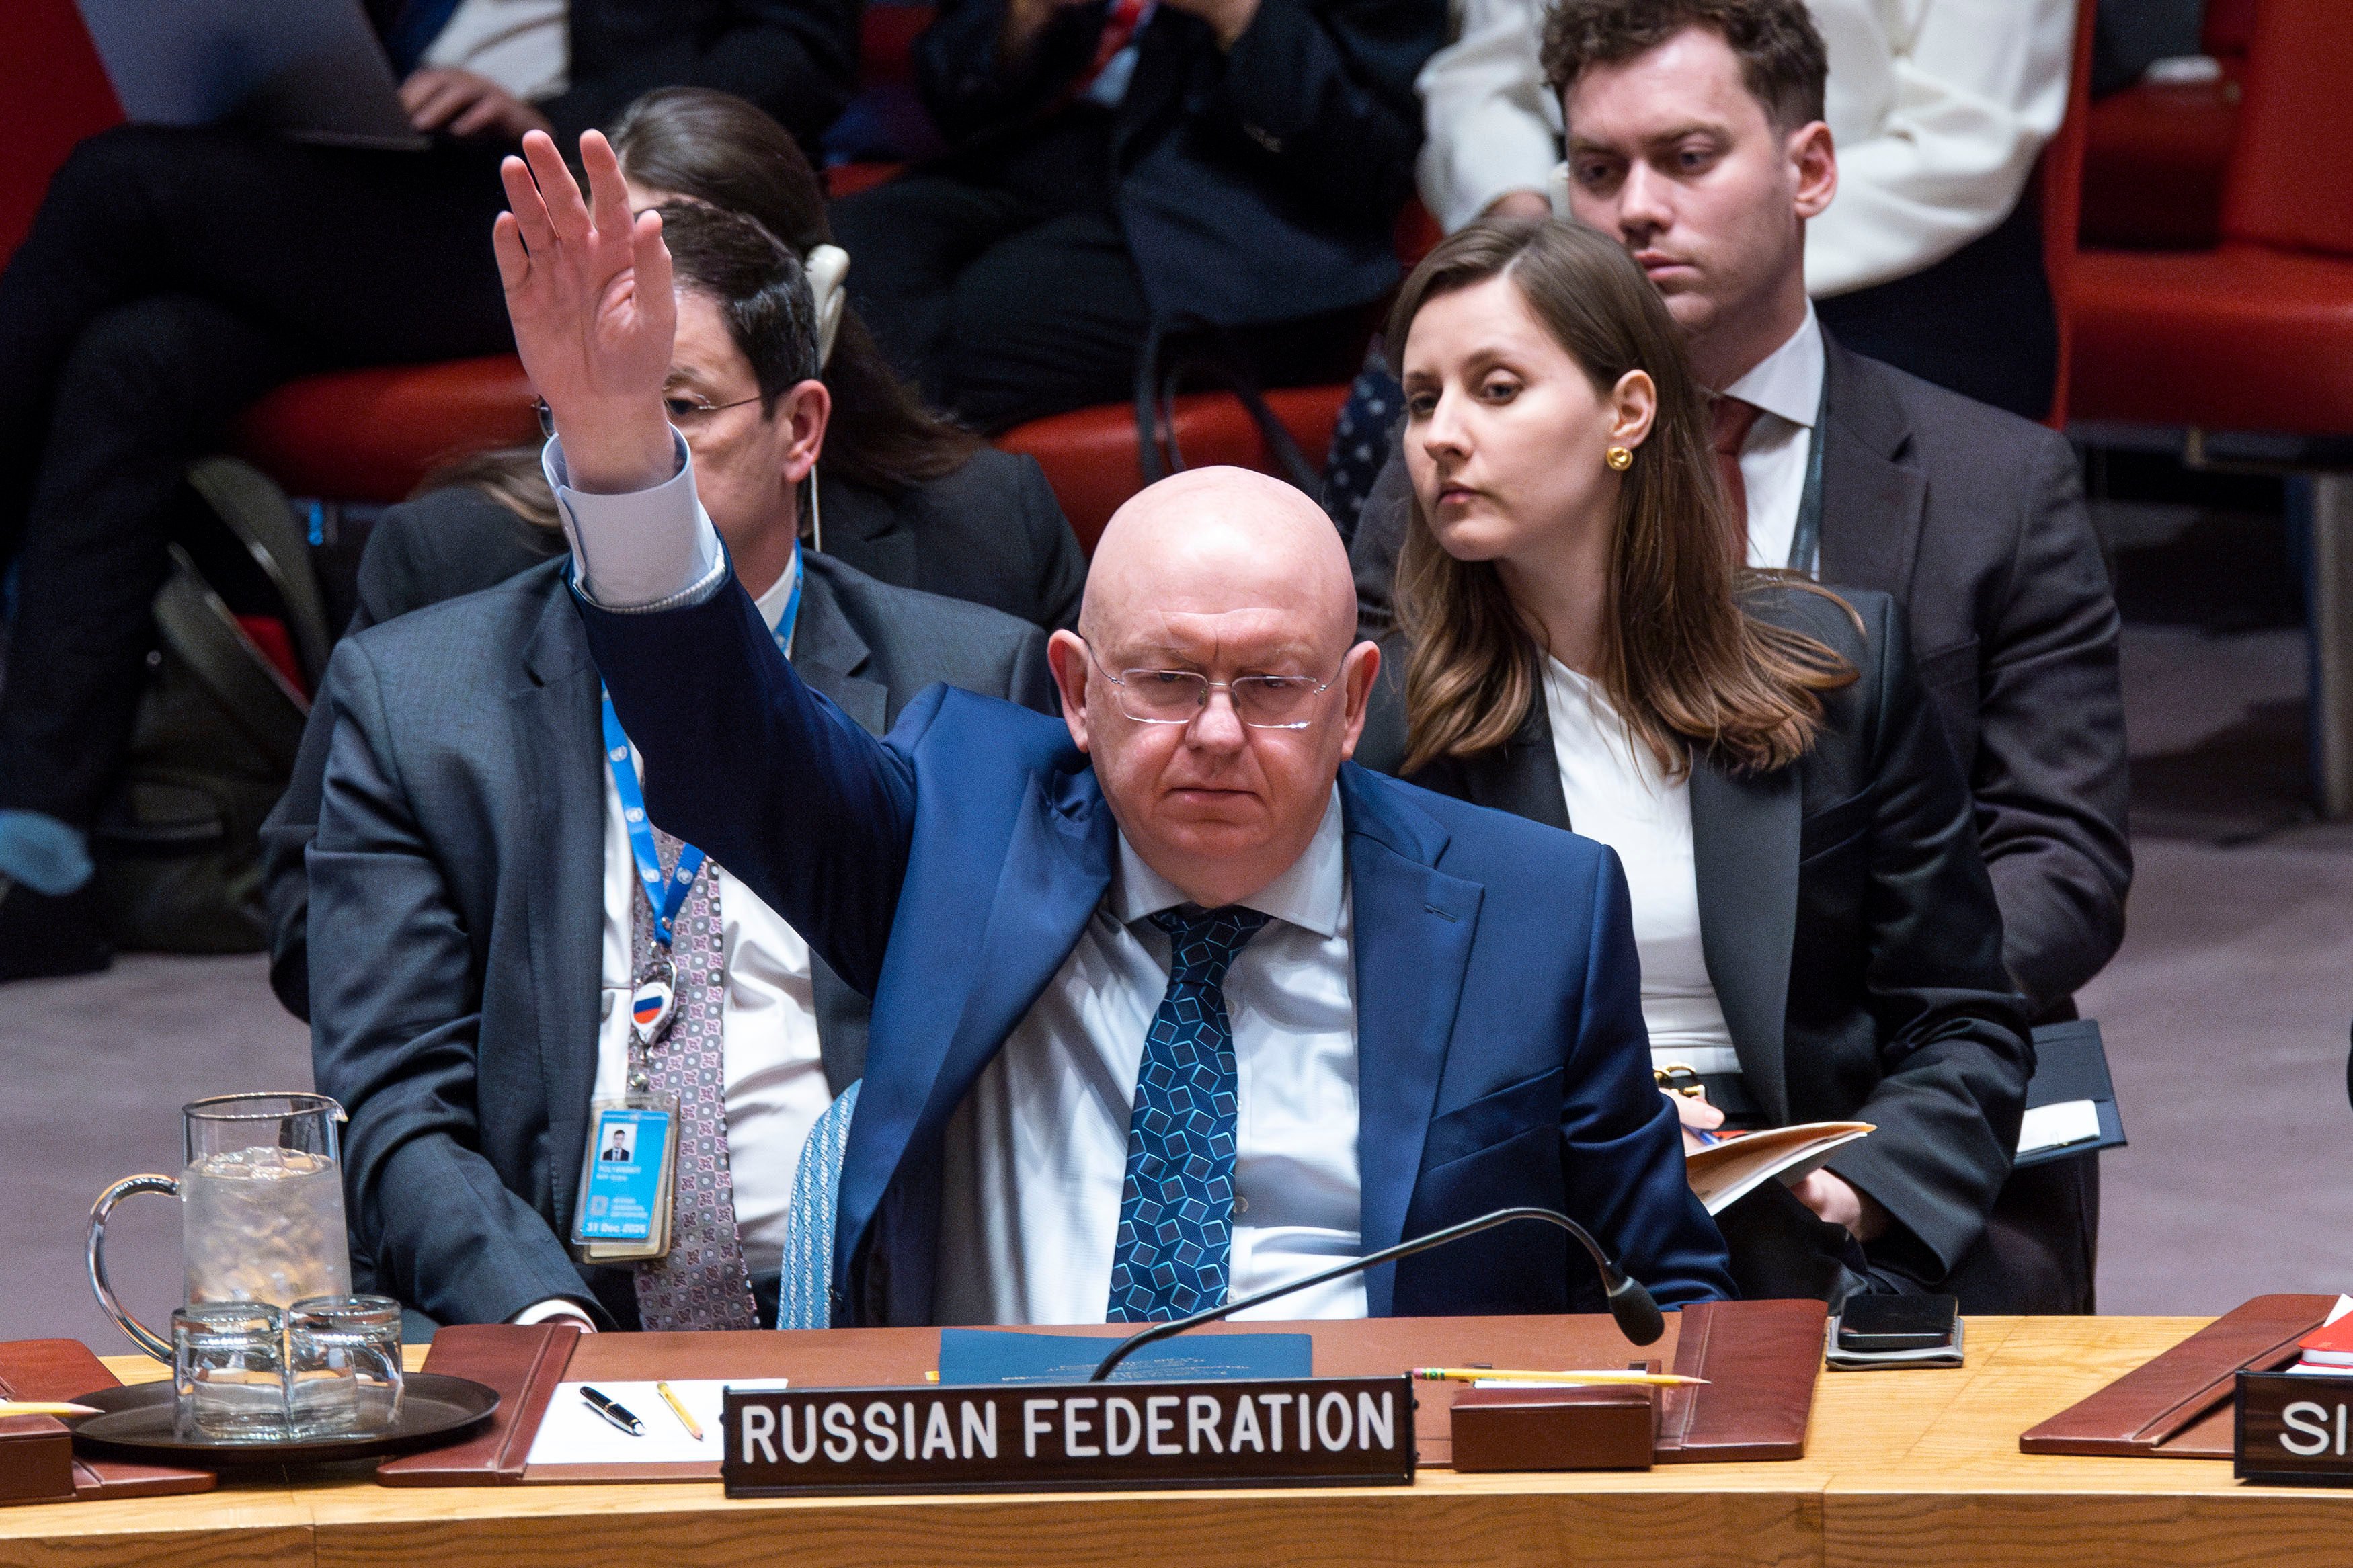 Russian Permanent Representative to the UN Vassily Nebenzia raises his hand to veto the non-proliferation of nuclear weapons resolution bill at the United Nations headquarters on Wednesday. Photo: AP